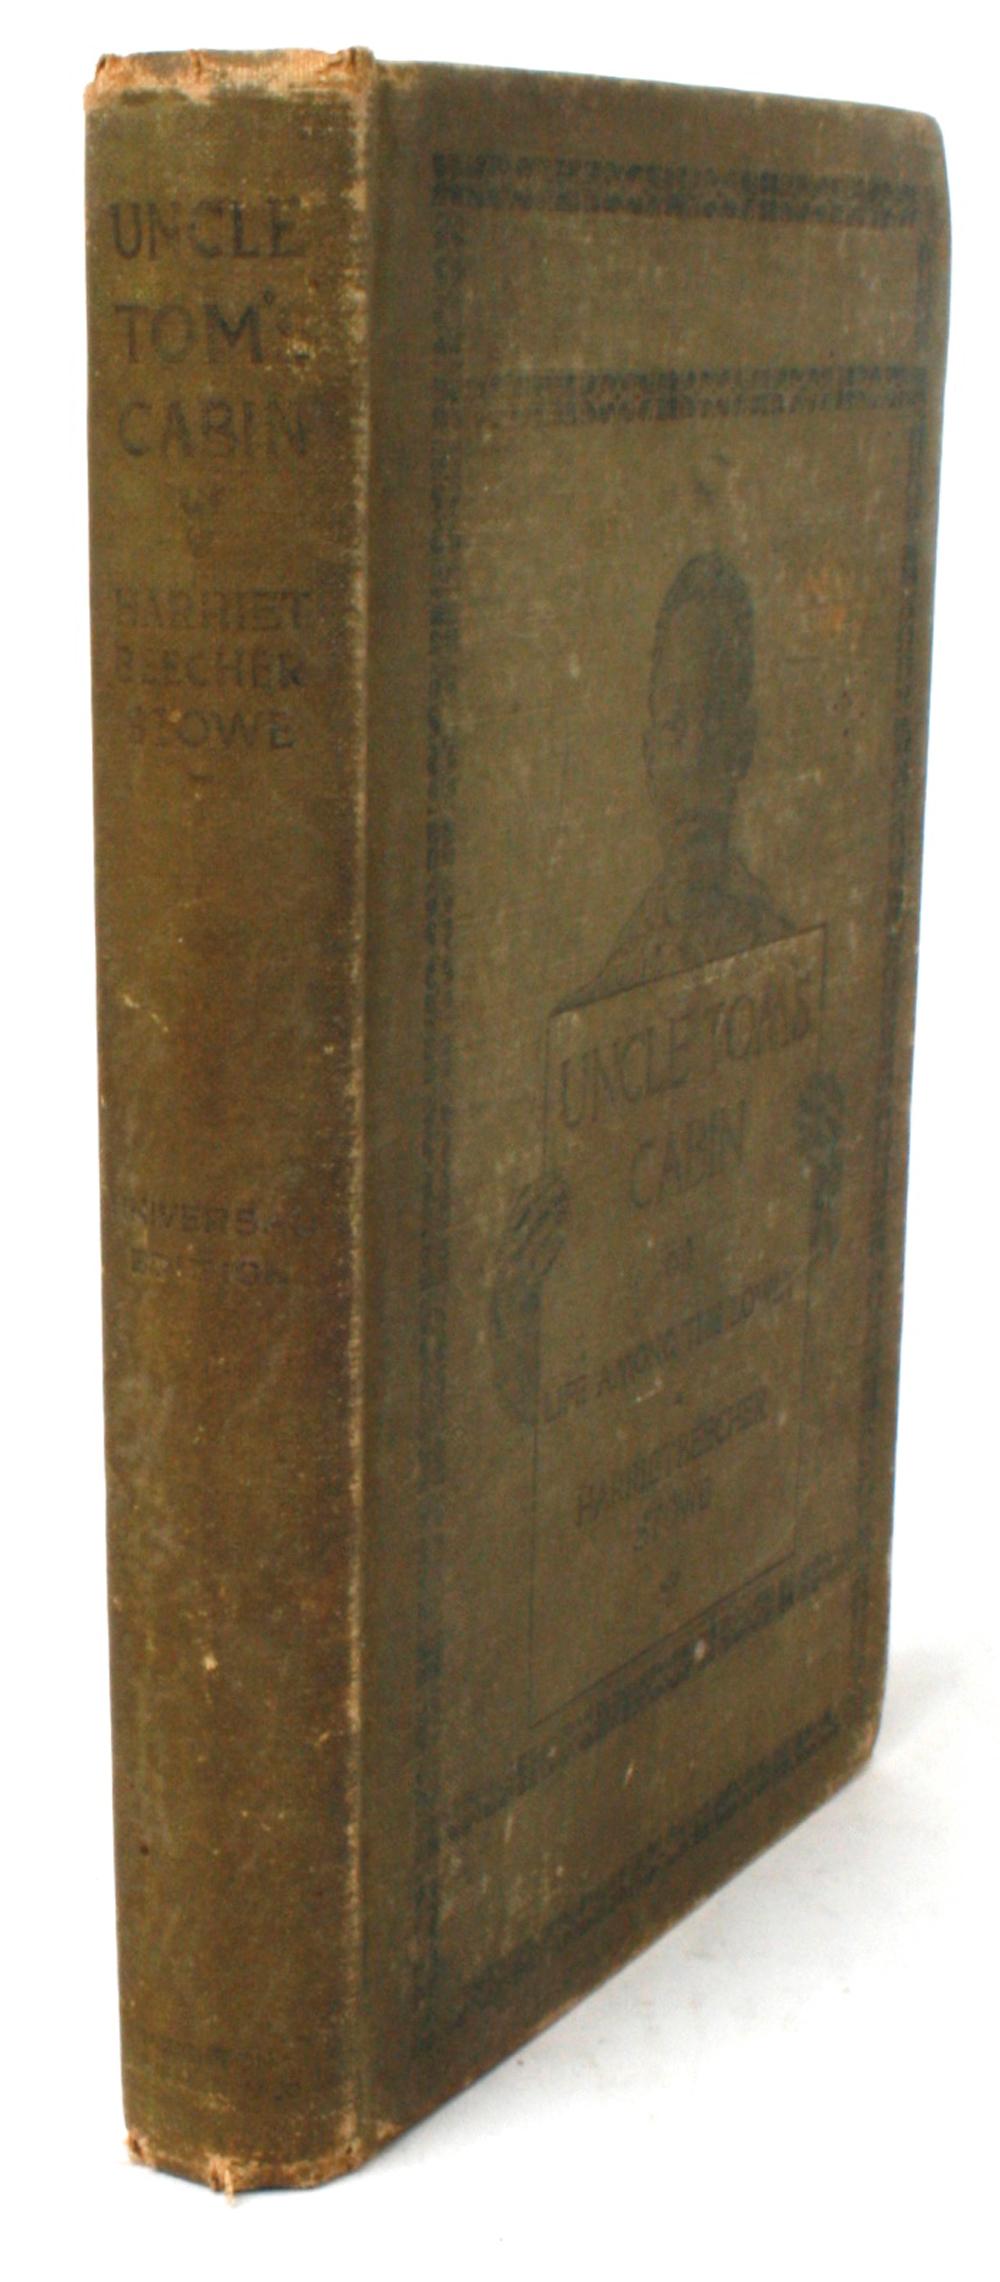 Uncle Tom's Cabin; or, Life Among the Lowly by Harriet Beecher Stowe. Boston and New York: Houghton, Mifflin and Company, 1892. Universal edition hardcover with no dust jacket. 273 pp. This antique book is the famous anti-slavery novel by American